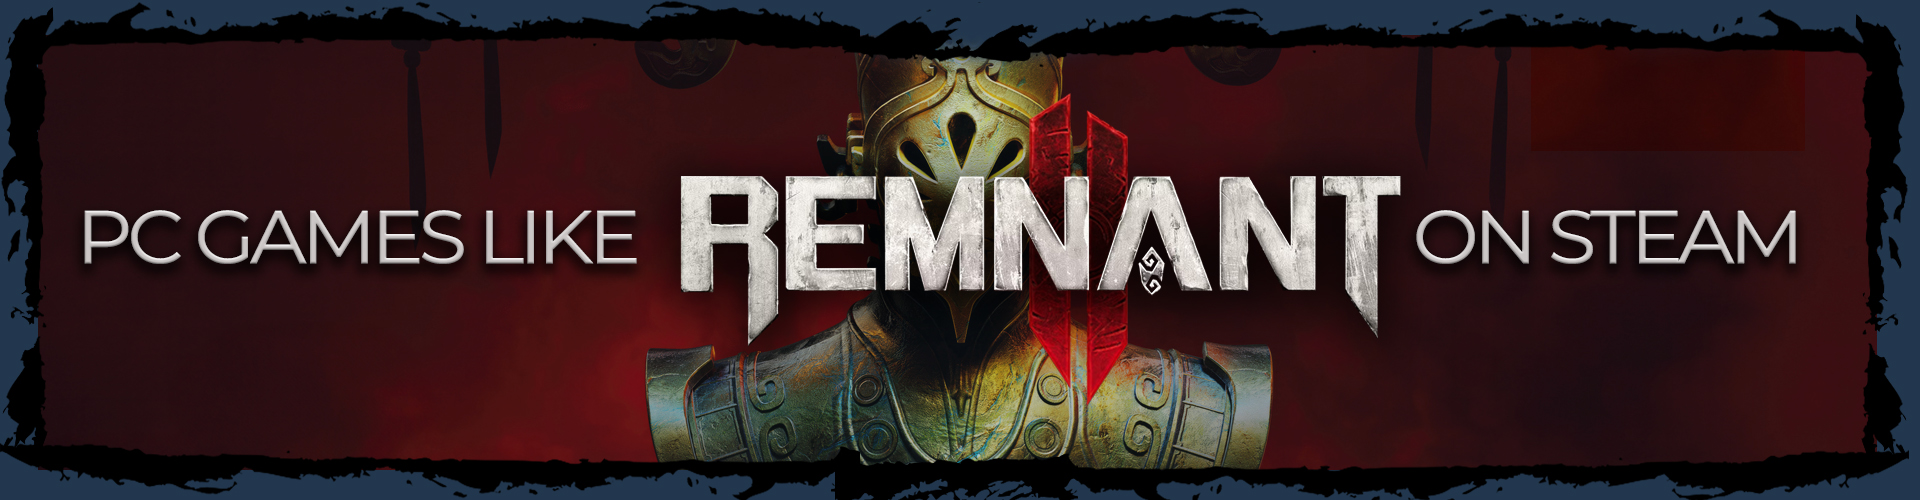 PC Games like Remnant 2 on Steam